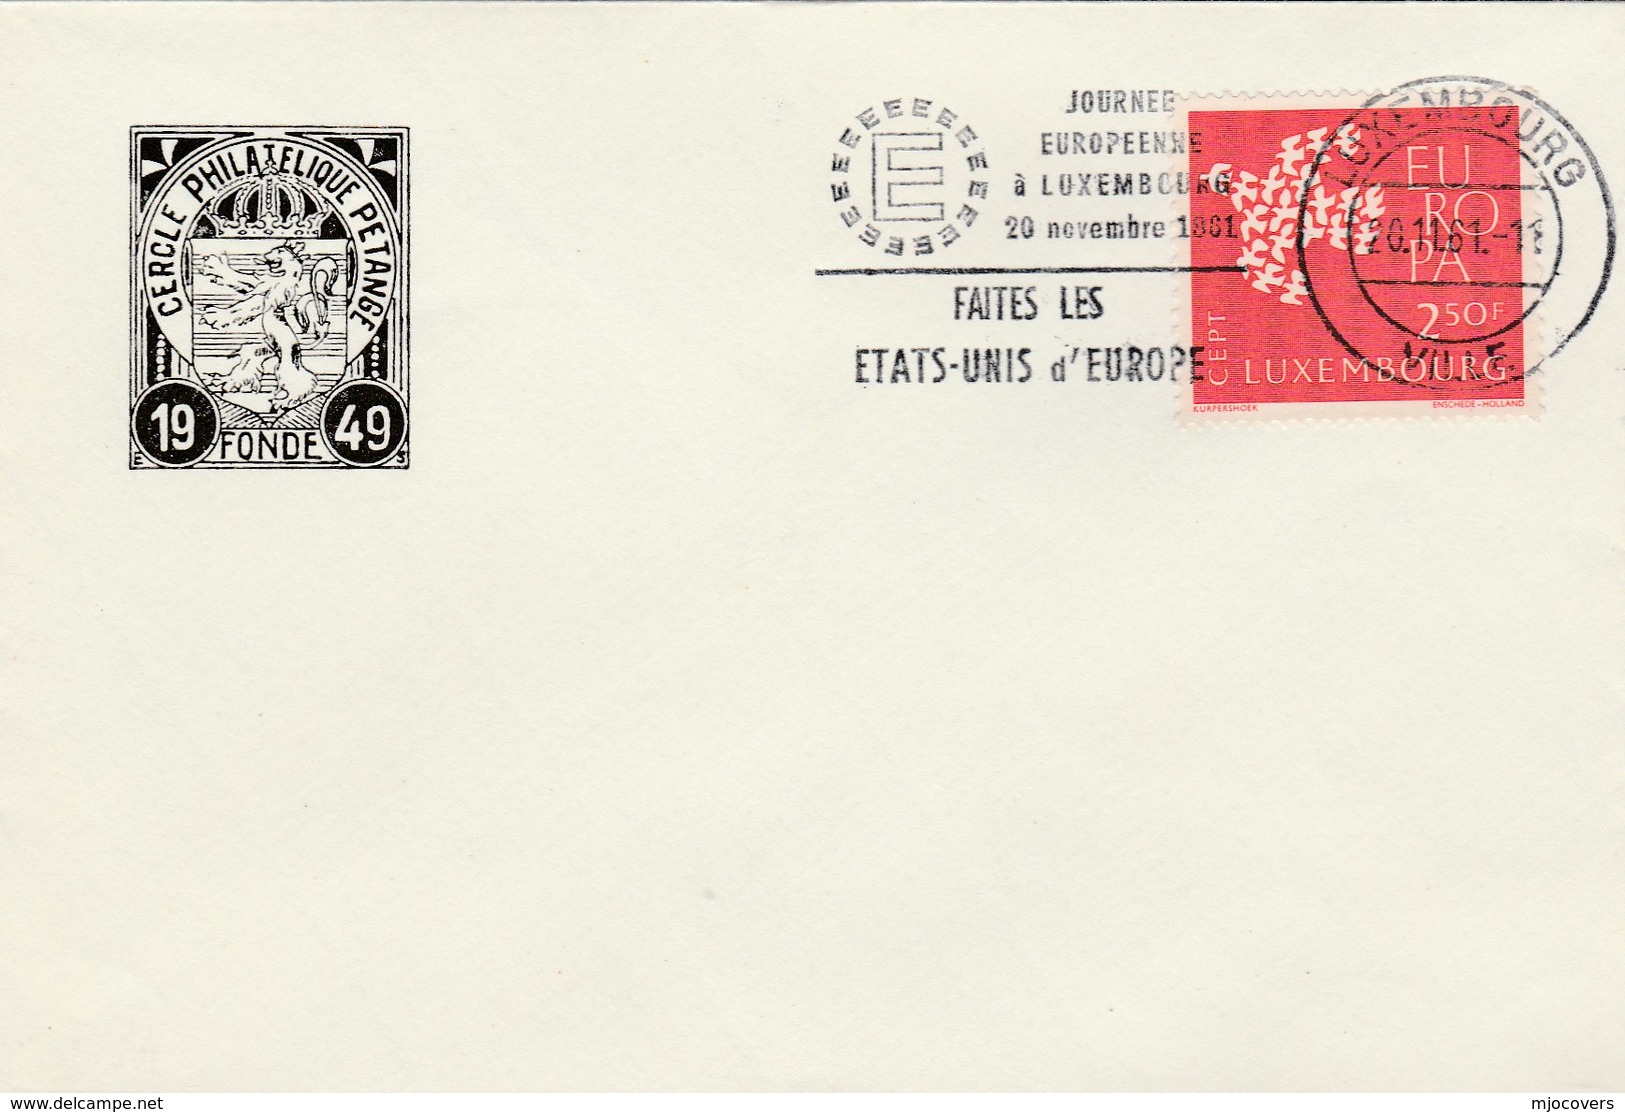 1961 Luxembourg EUROPA DAY,  MAKE The UNITED STATES OF EUROPE EVENT COVER Stamps European Community - 1961